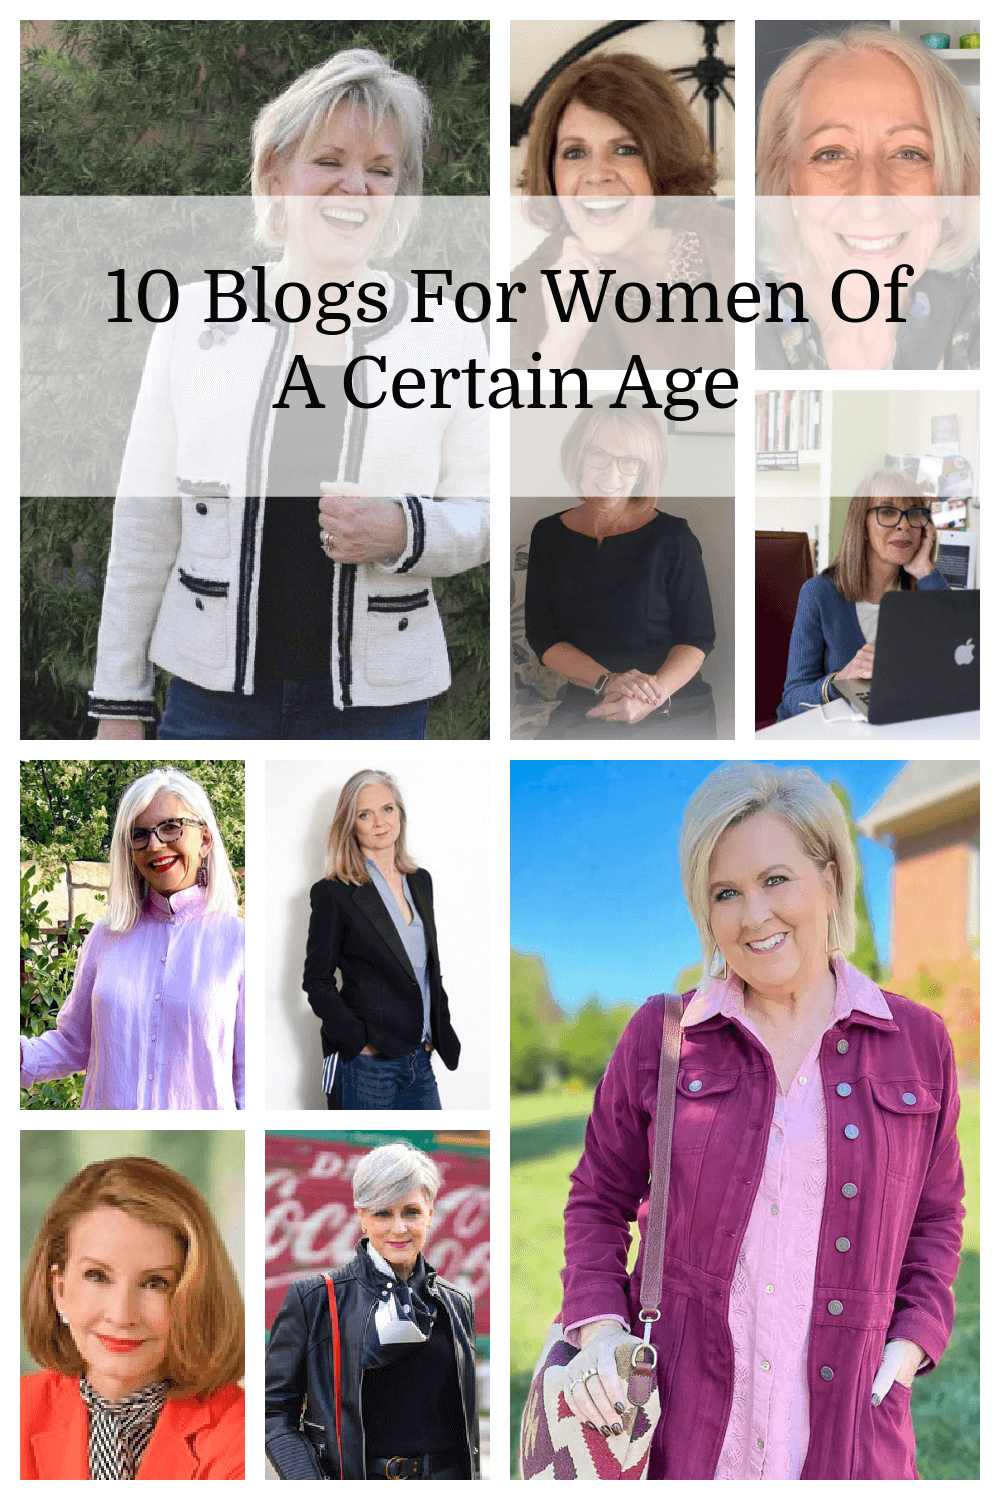 10 Blogs For Women Of A Certain Age